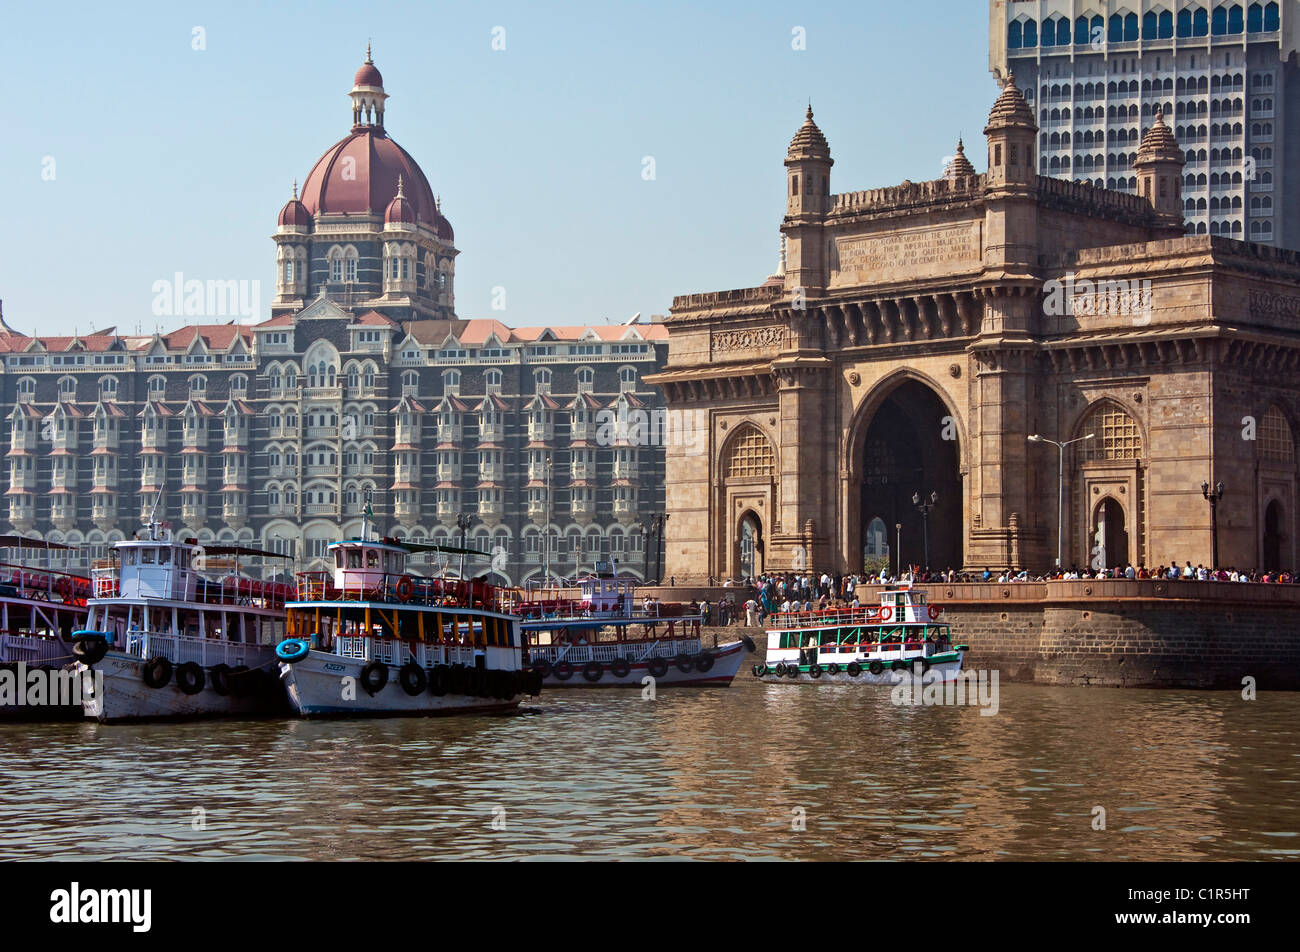 Boats in harbour in front of Mumbai's The Taj Mahal Palace Hotel and Tower at Gate of India built in 1903. Stock Photo